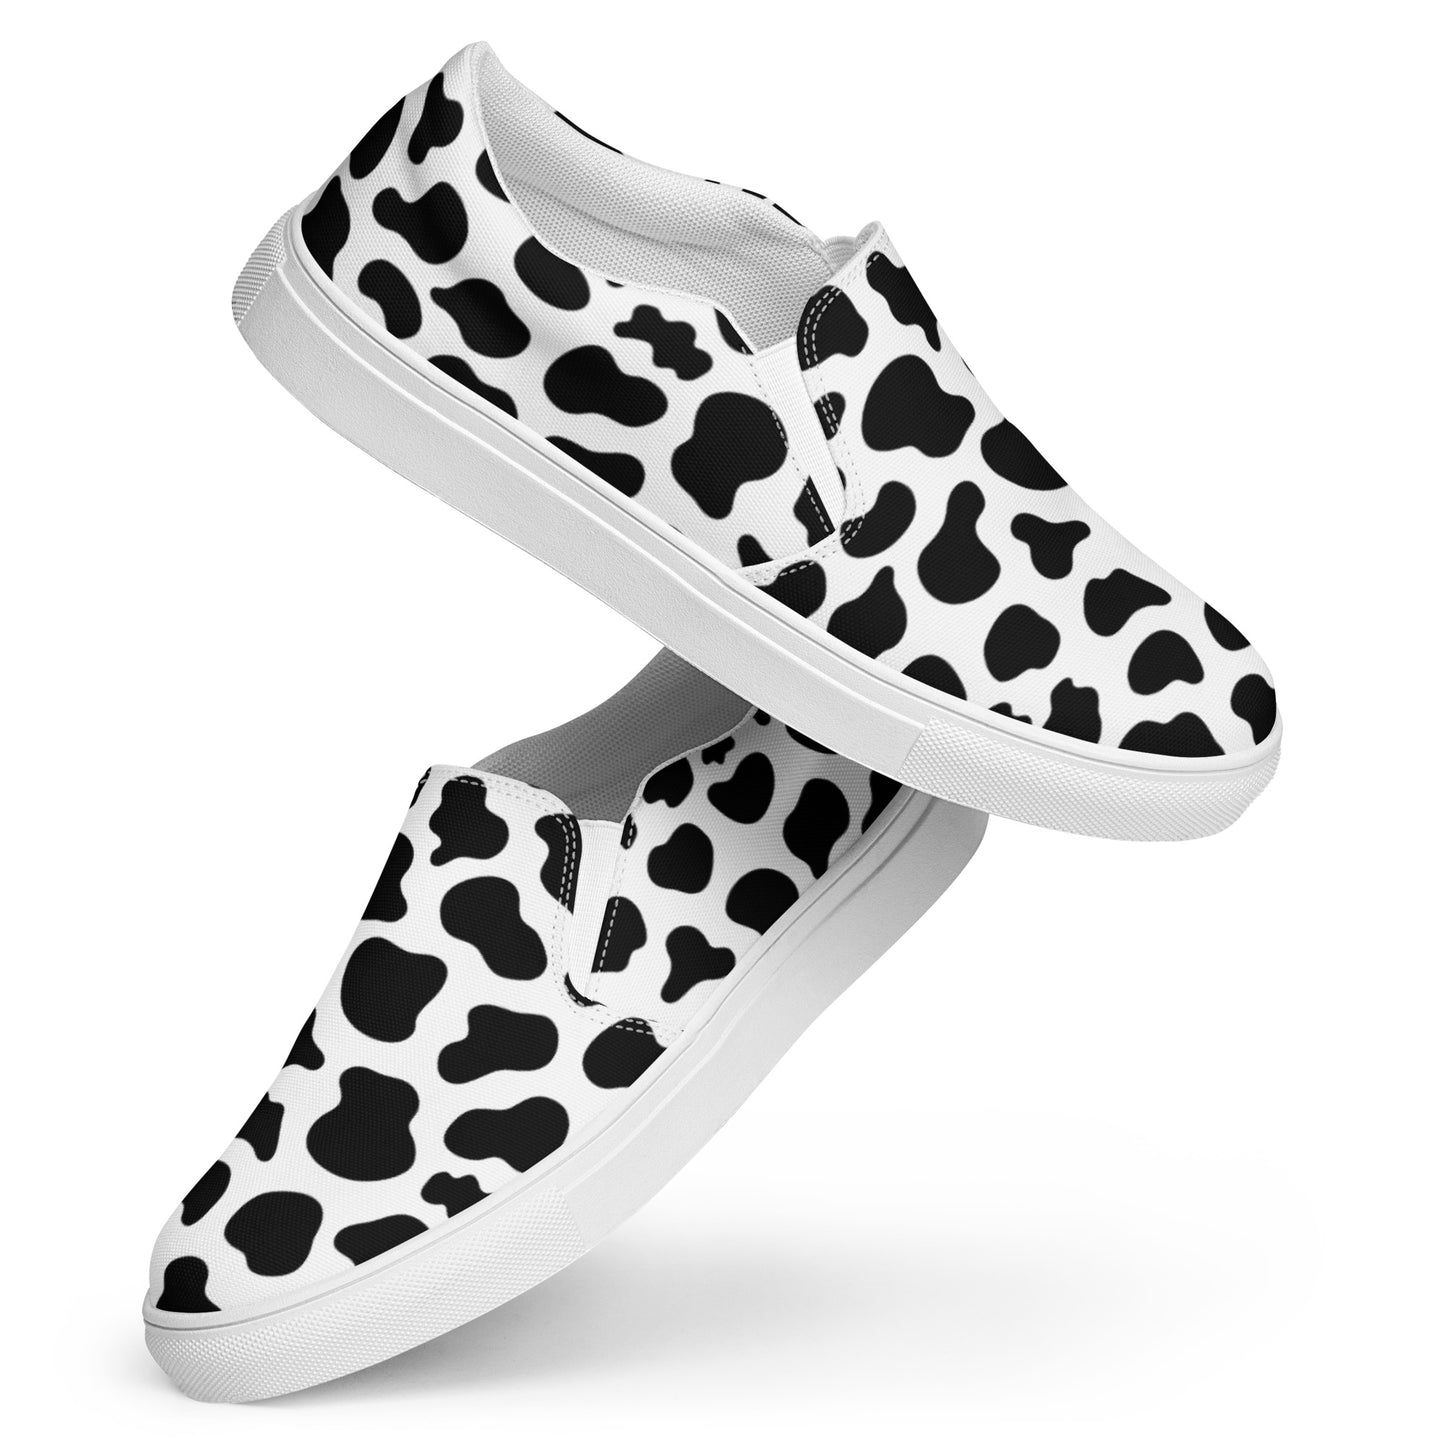 Western Cow Skin Print Women’s slip-on canvas shoes